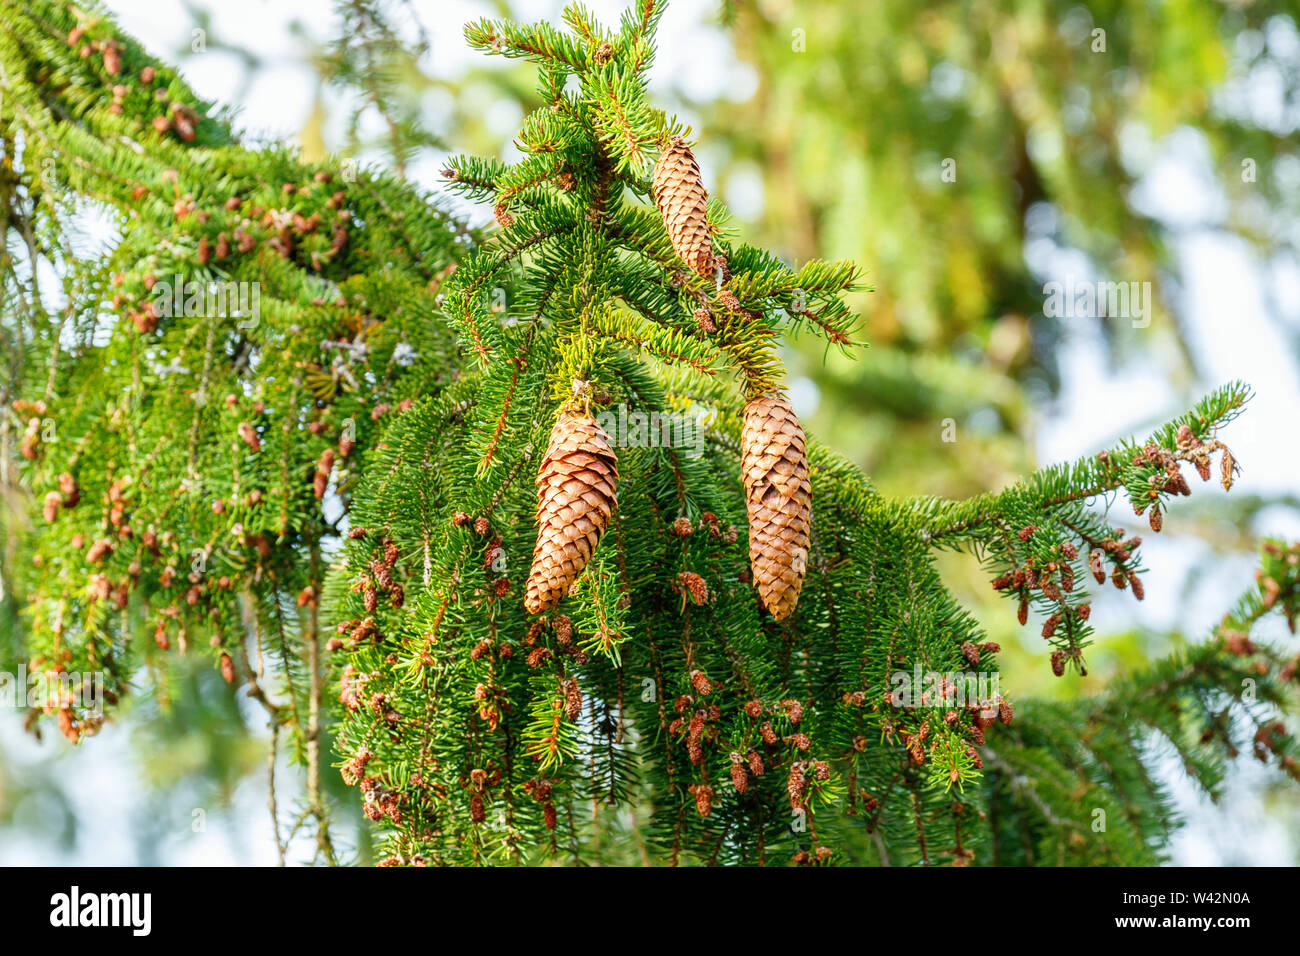 Spruch cones on a branch Stock Photo